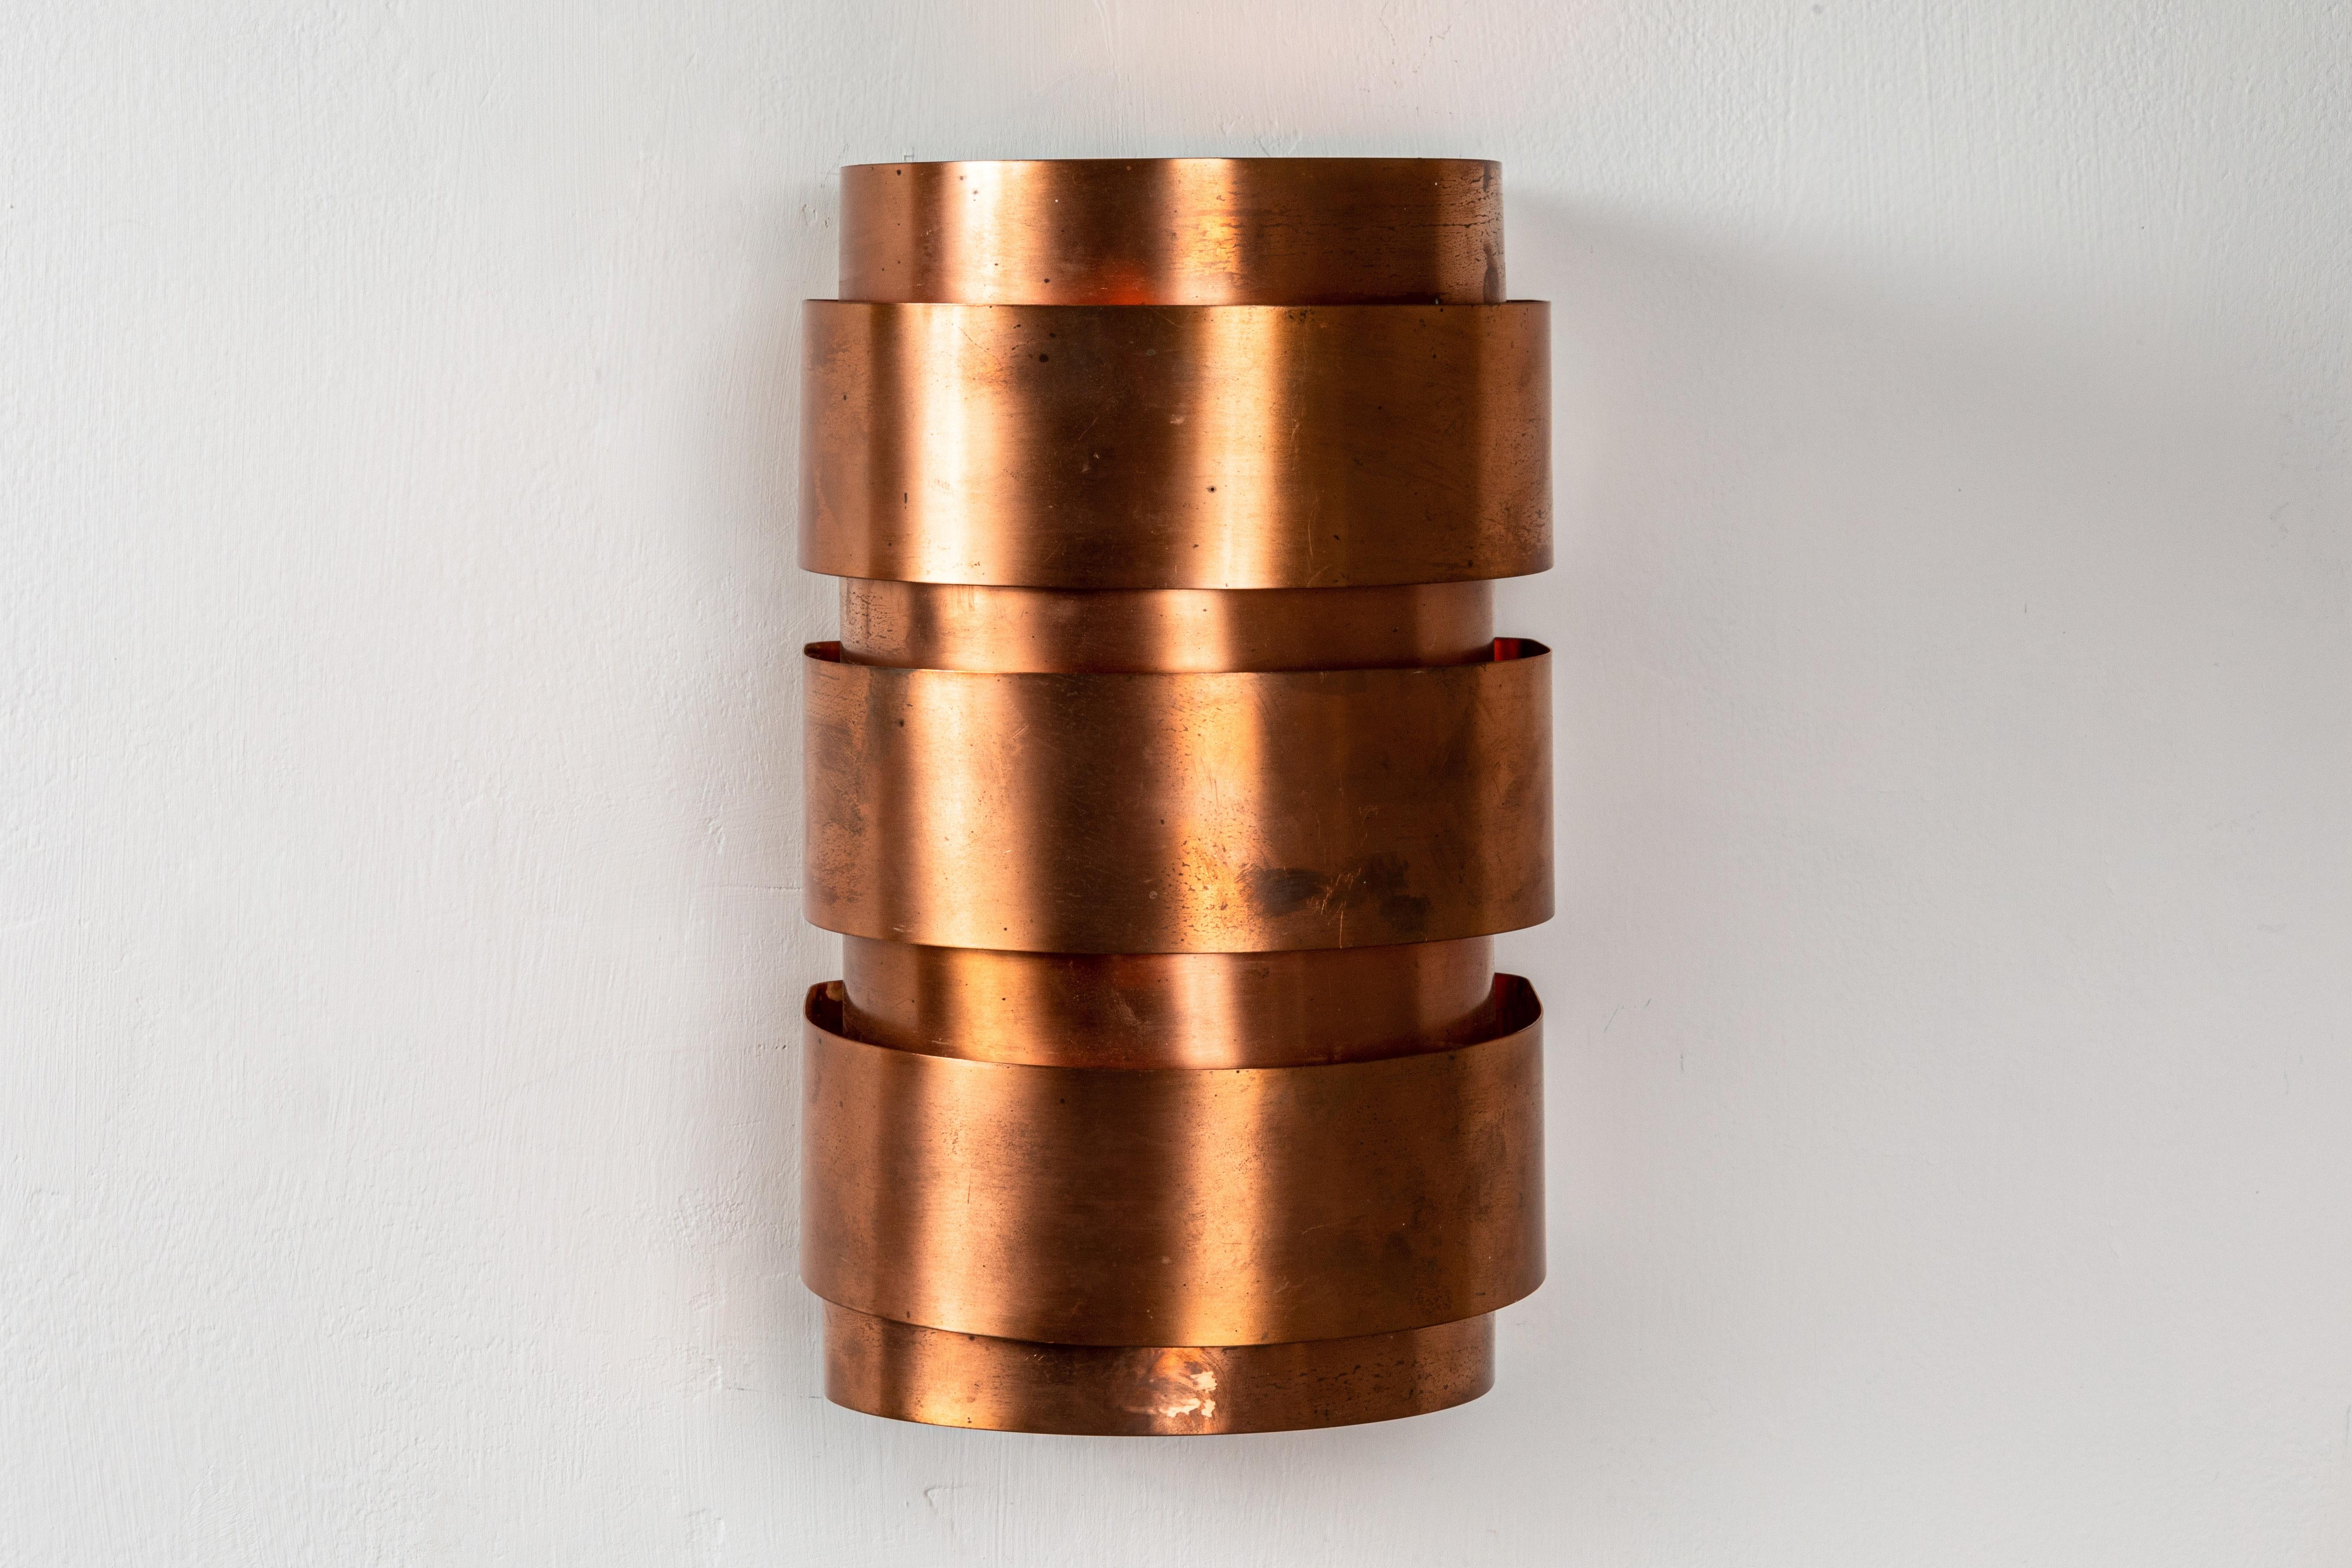 Hans-Agne Jakobsson model V-155 copper sconces for Markaryd, Sweden. Executed in copper, this incredibly refined design is quintessentially Scandinavian.

Price is for the pair.

Professionally rewired for US electrical with custom modified